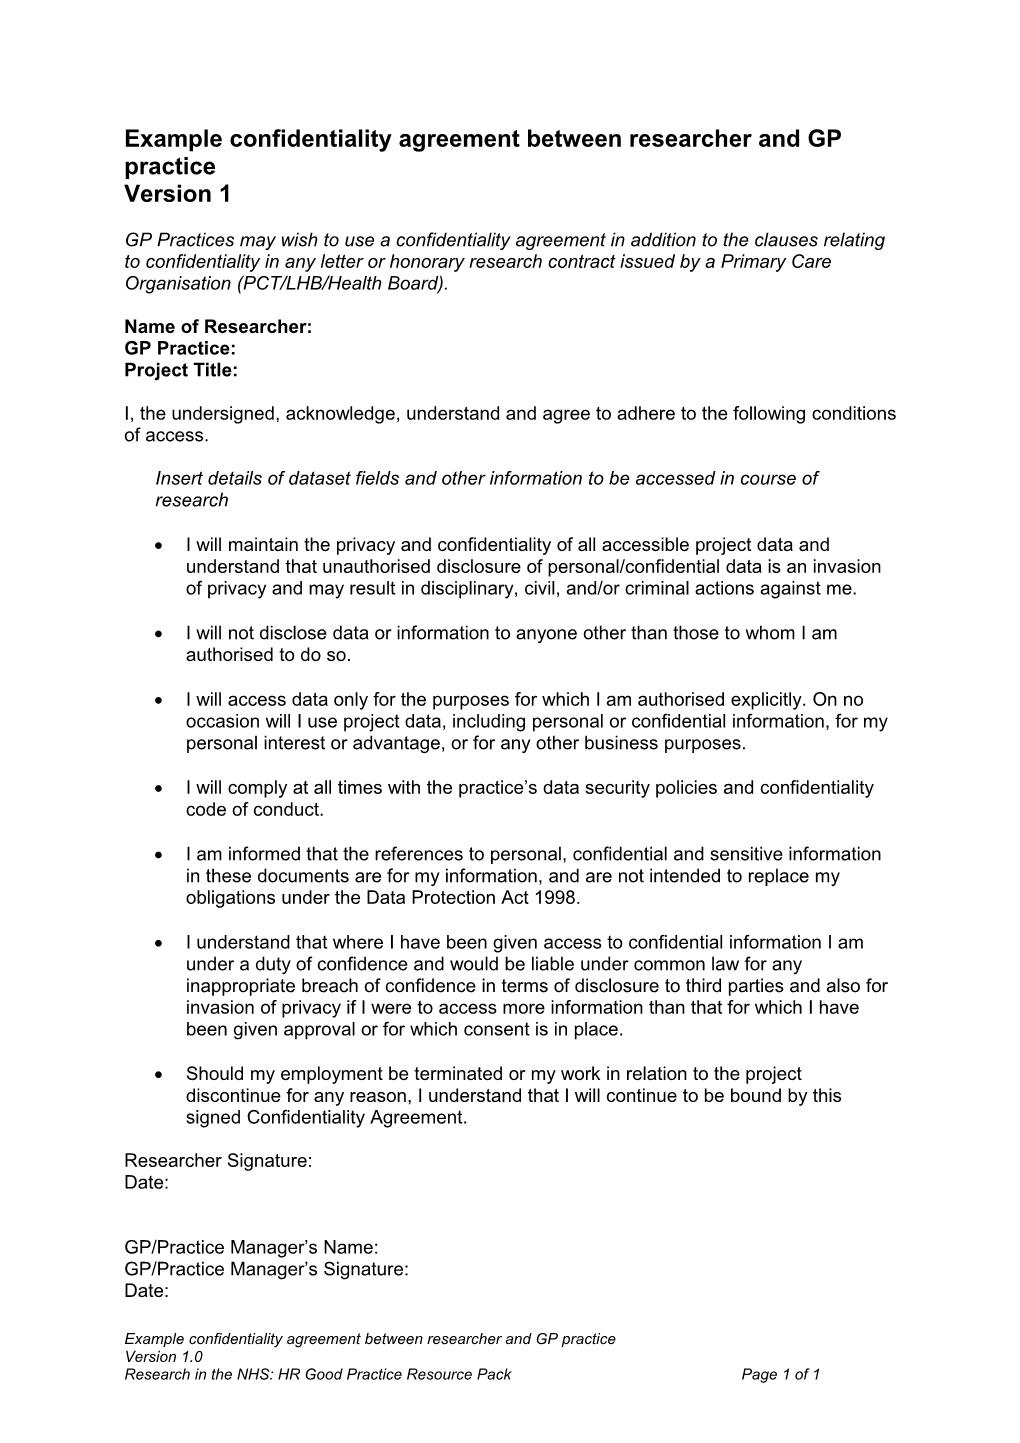 Example Confidentiality Agreement Between Researcher and GP Practice